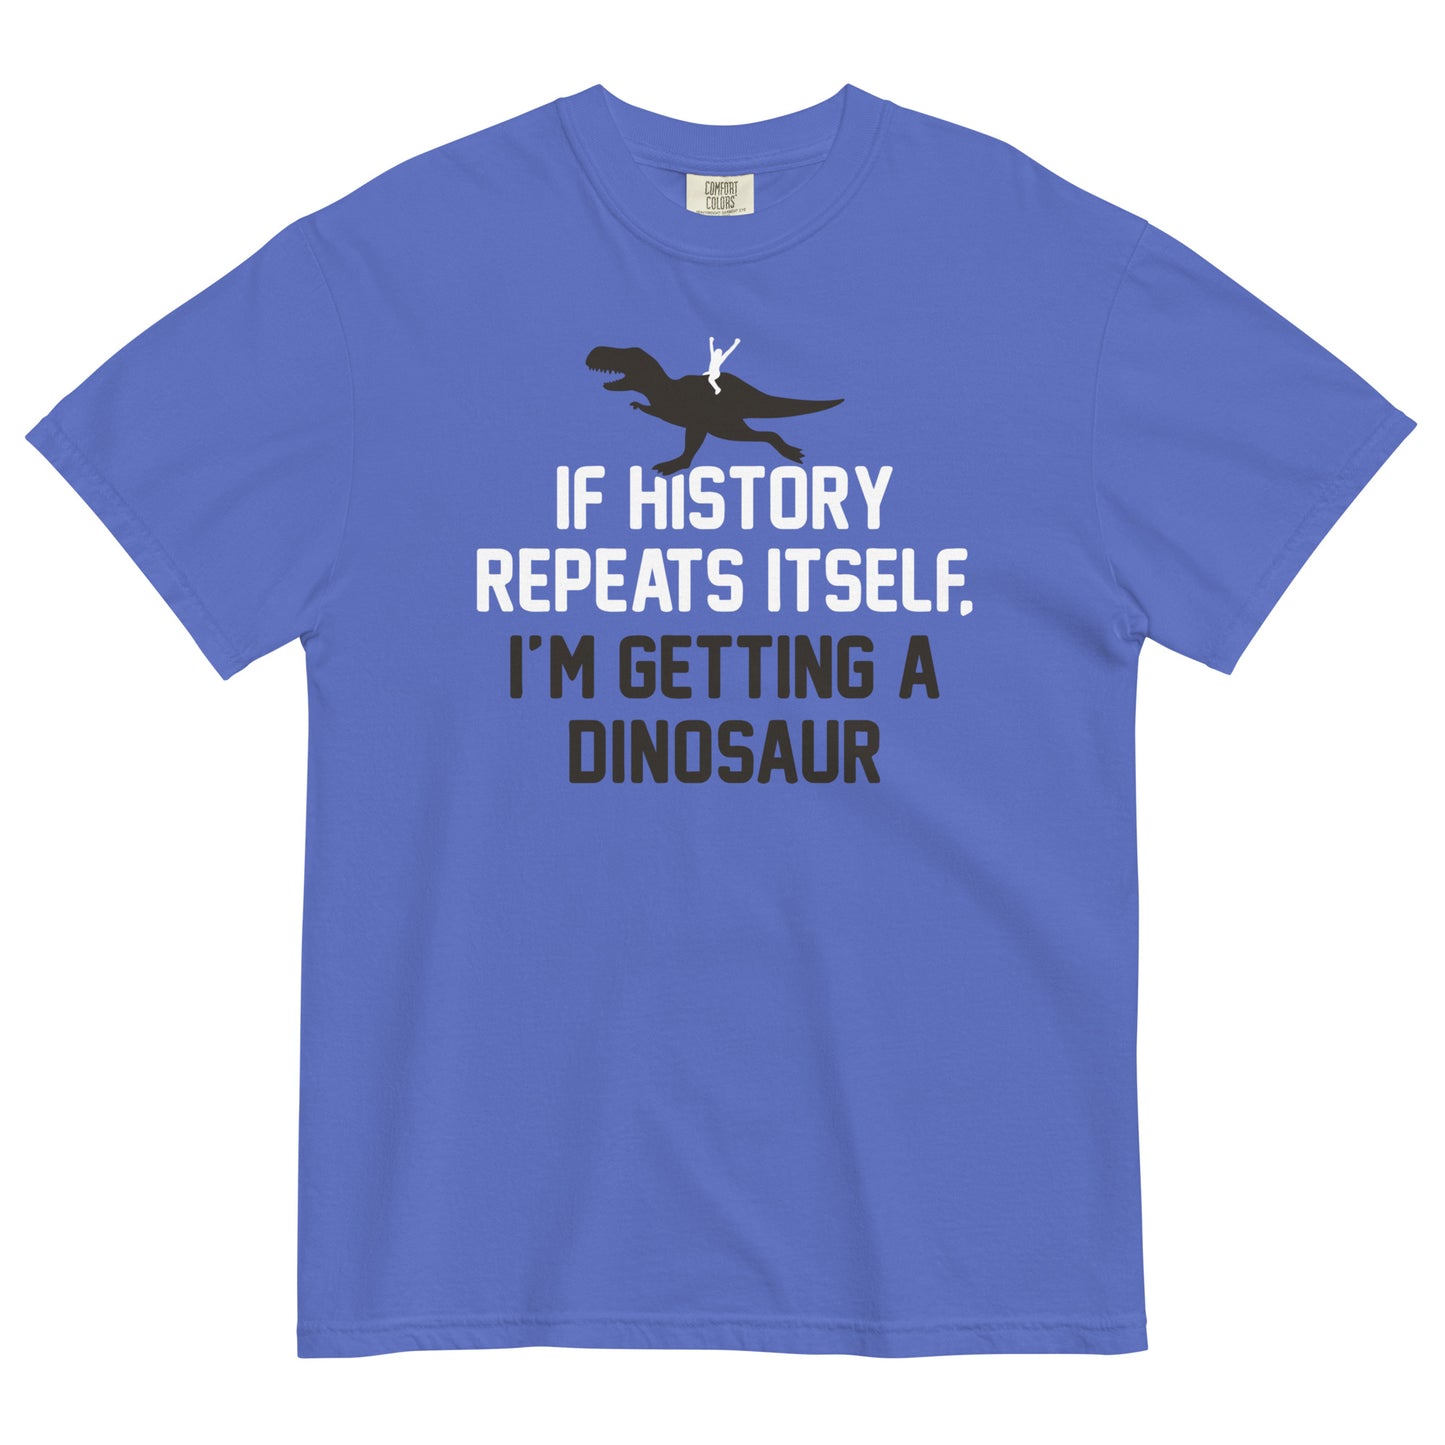 If History Repeats Itself, I'm Getting A Dinosaur Men's Relaxed Fit Tee